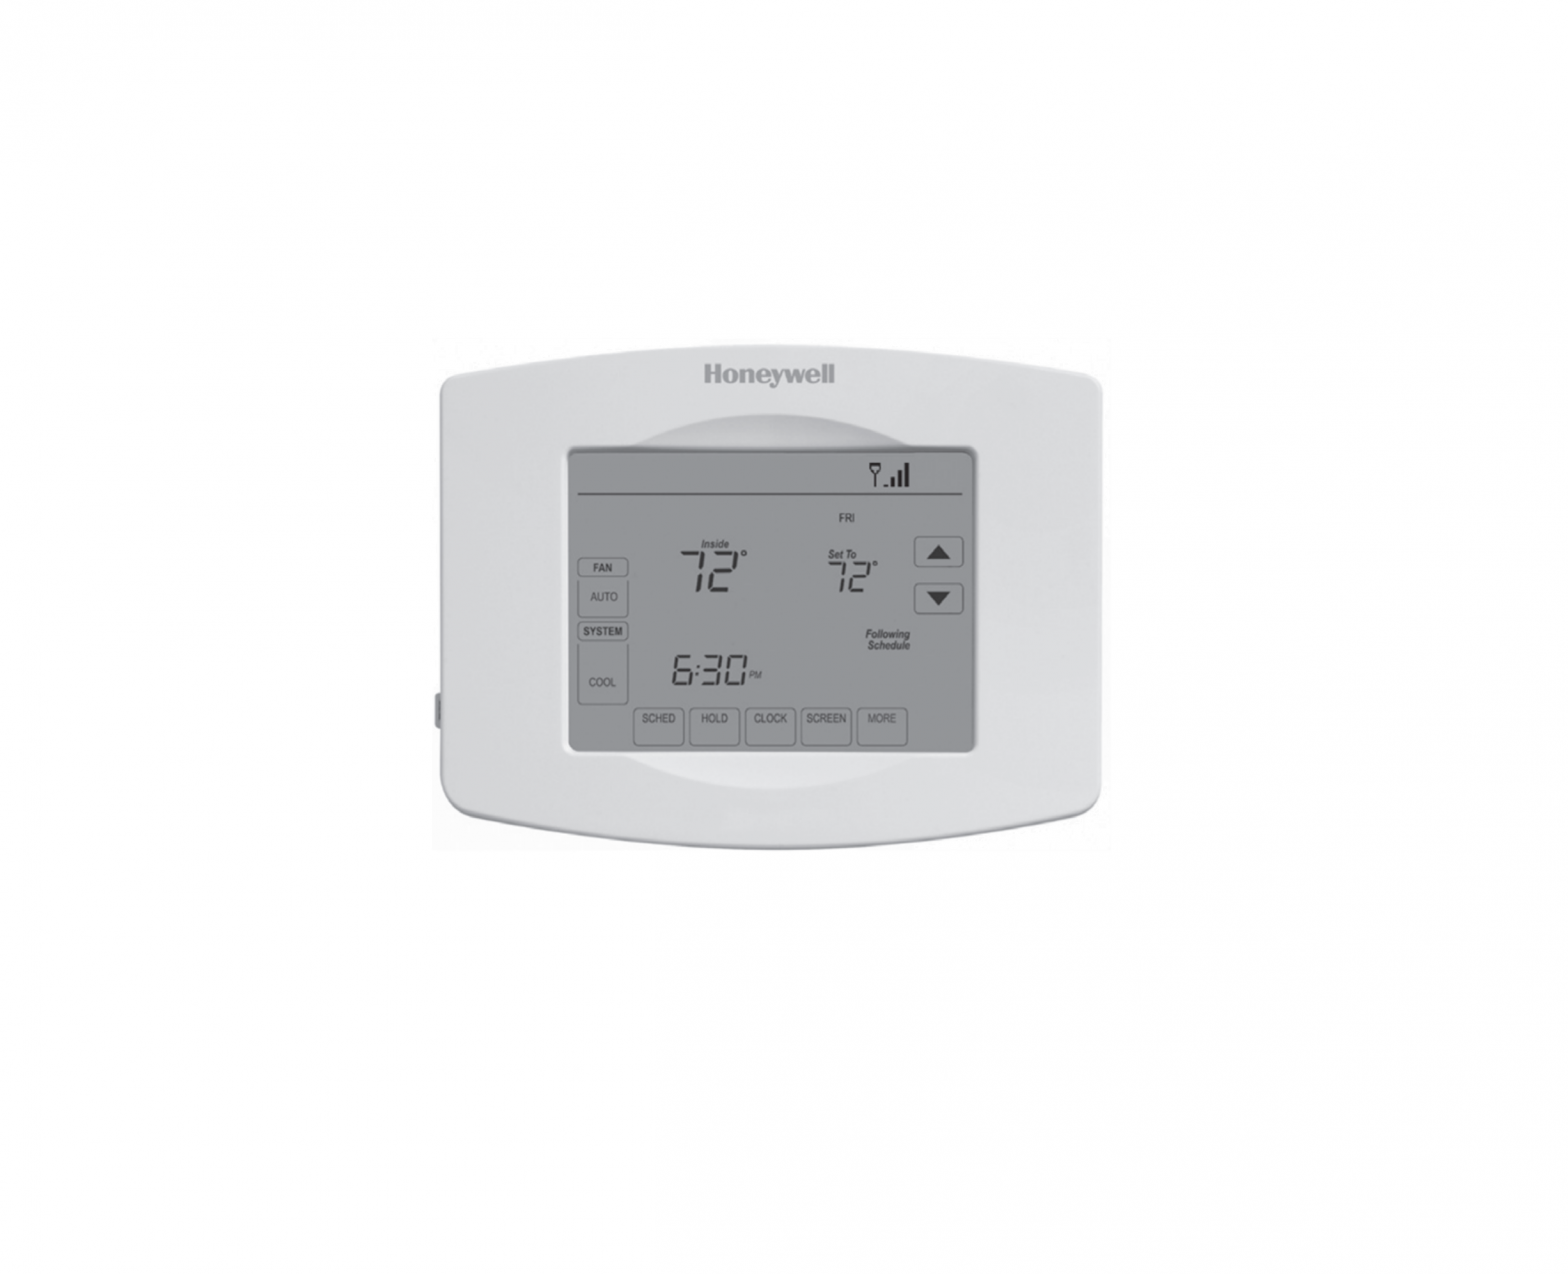 Honeywell TH8320WF VisionPRO Wi-Fi Programmable Thermostat User Guide